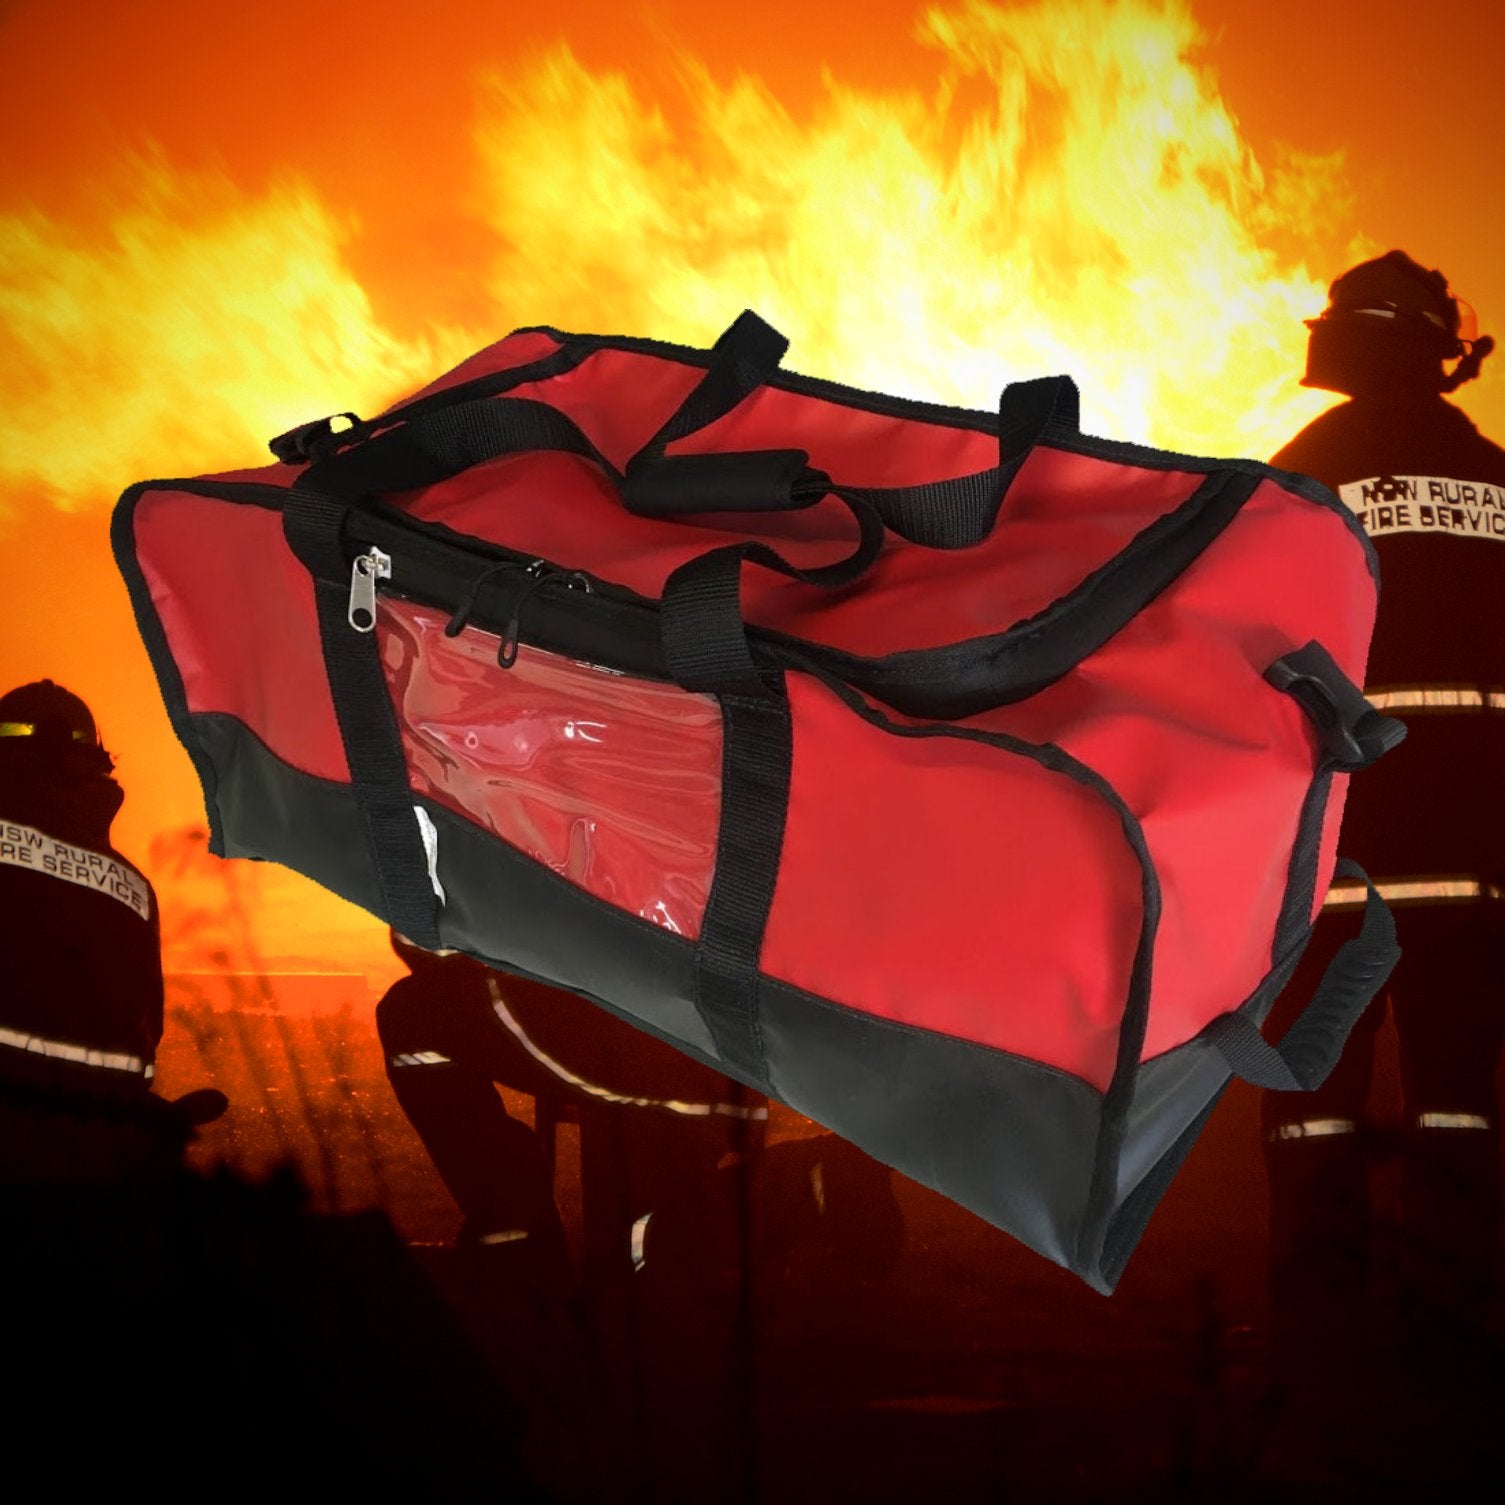 Emergency Services Gear bags